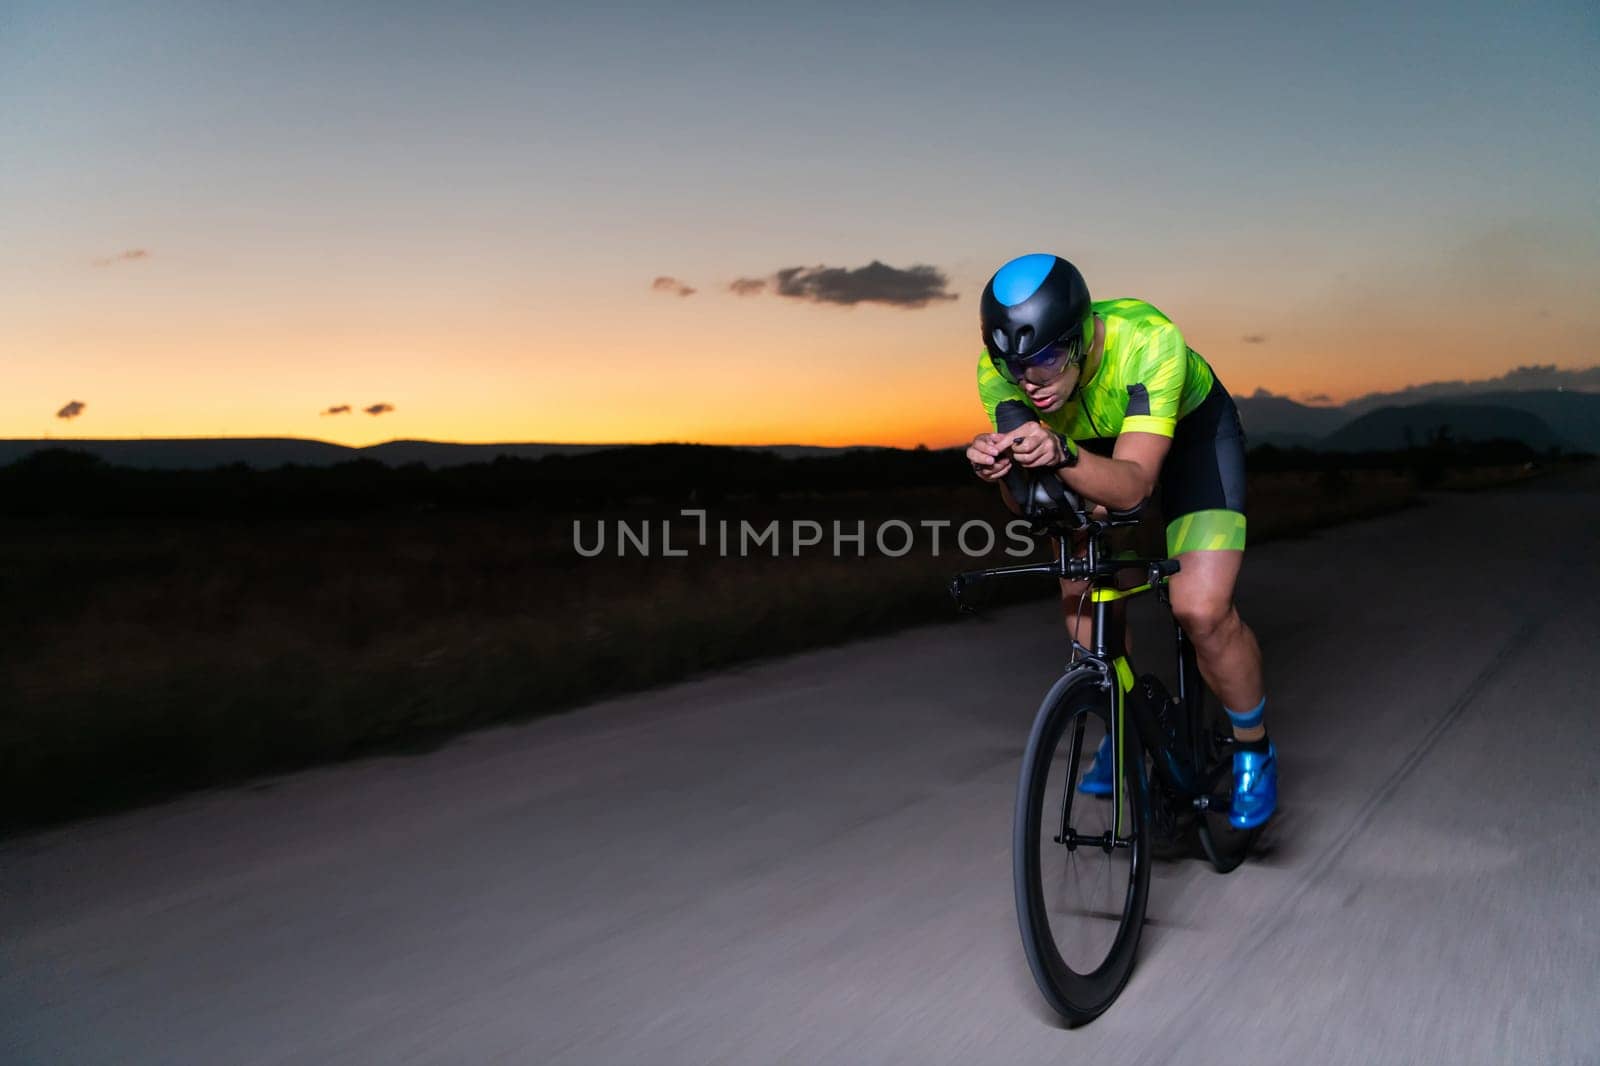 A triathlete rides his bike in the darkness of night, pushing himself to prepare for a marathon. The contrast between the darkness and the light of his bike creates a sense of drama and highlights the athlete's determination and perseverance. by dotshock